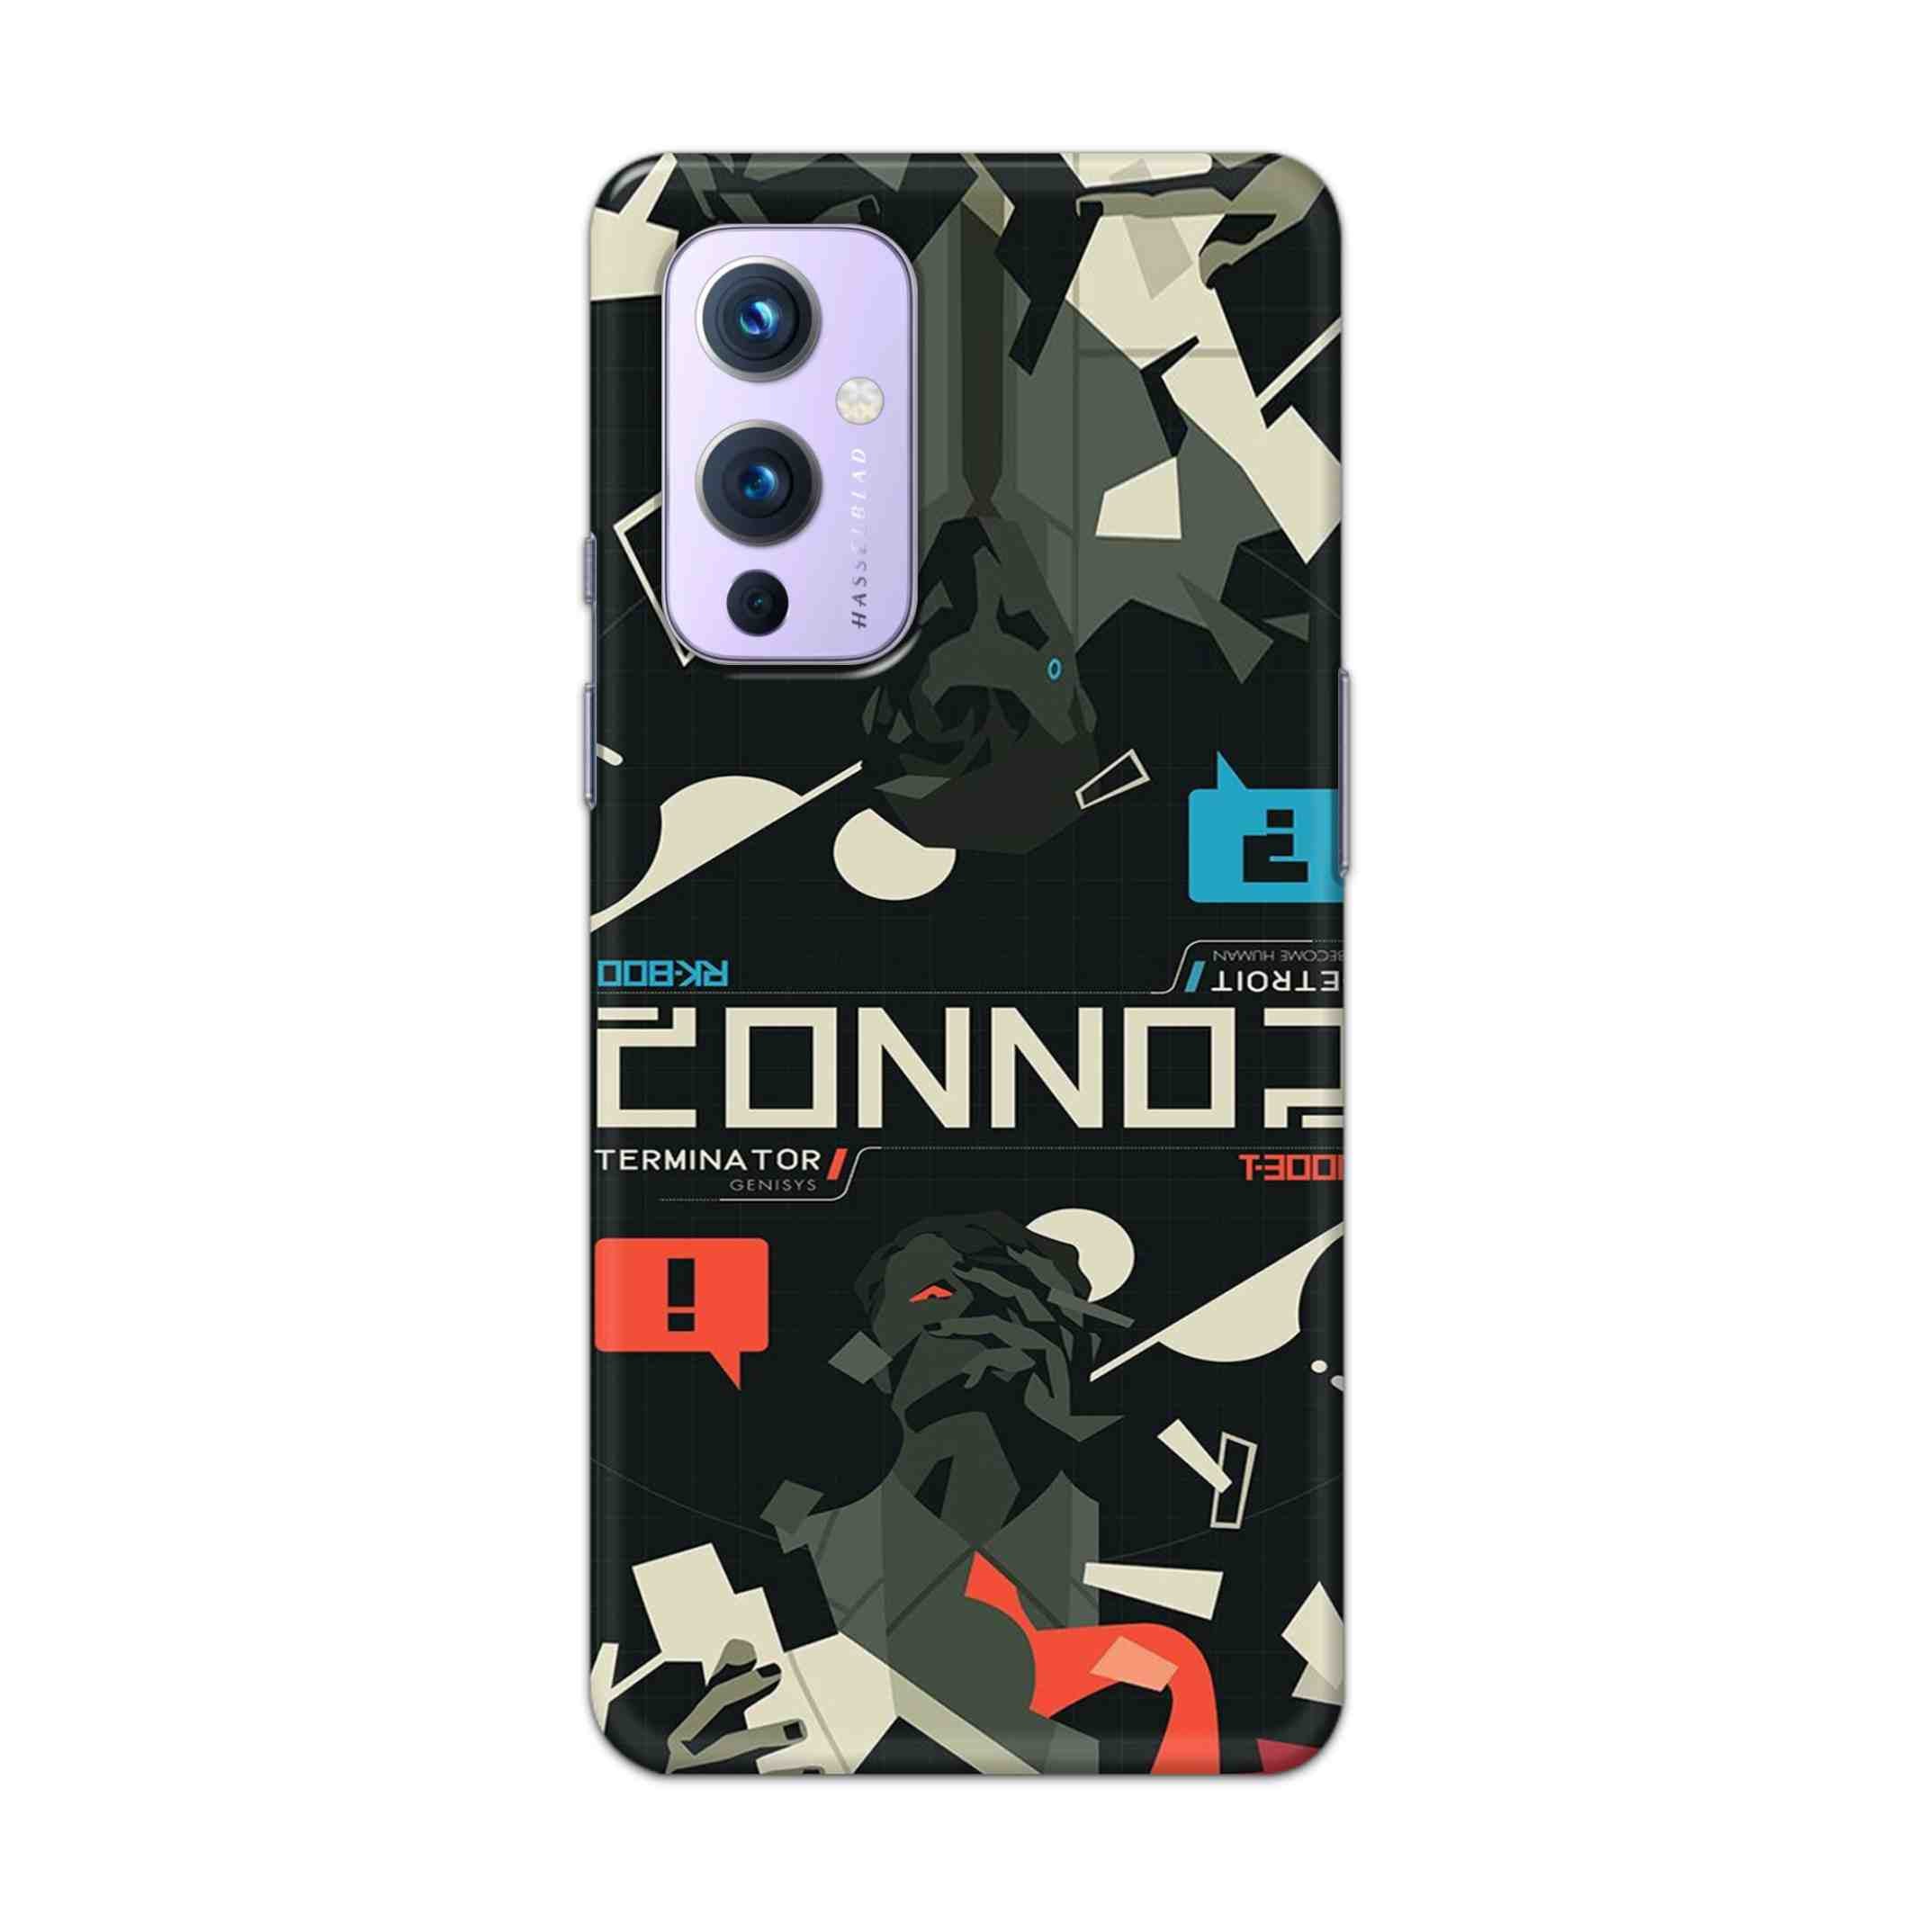 Buy Terminator Hard Back Mobile Phone Case Cover For OnePlus 9 Online